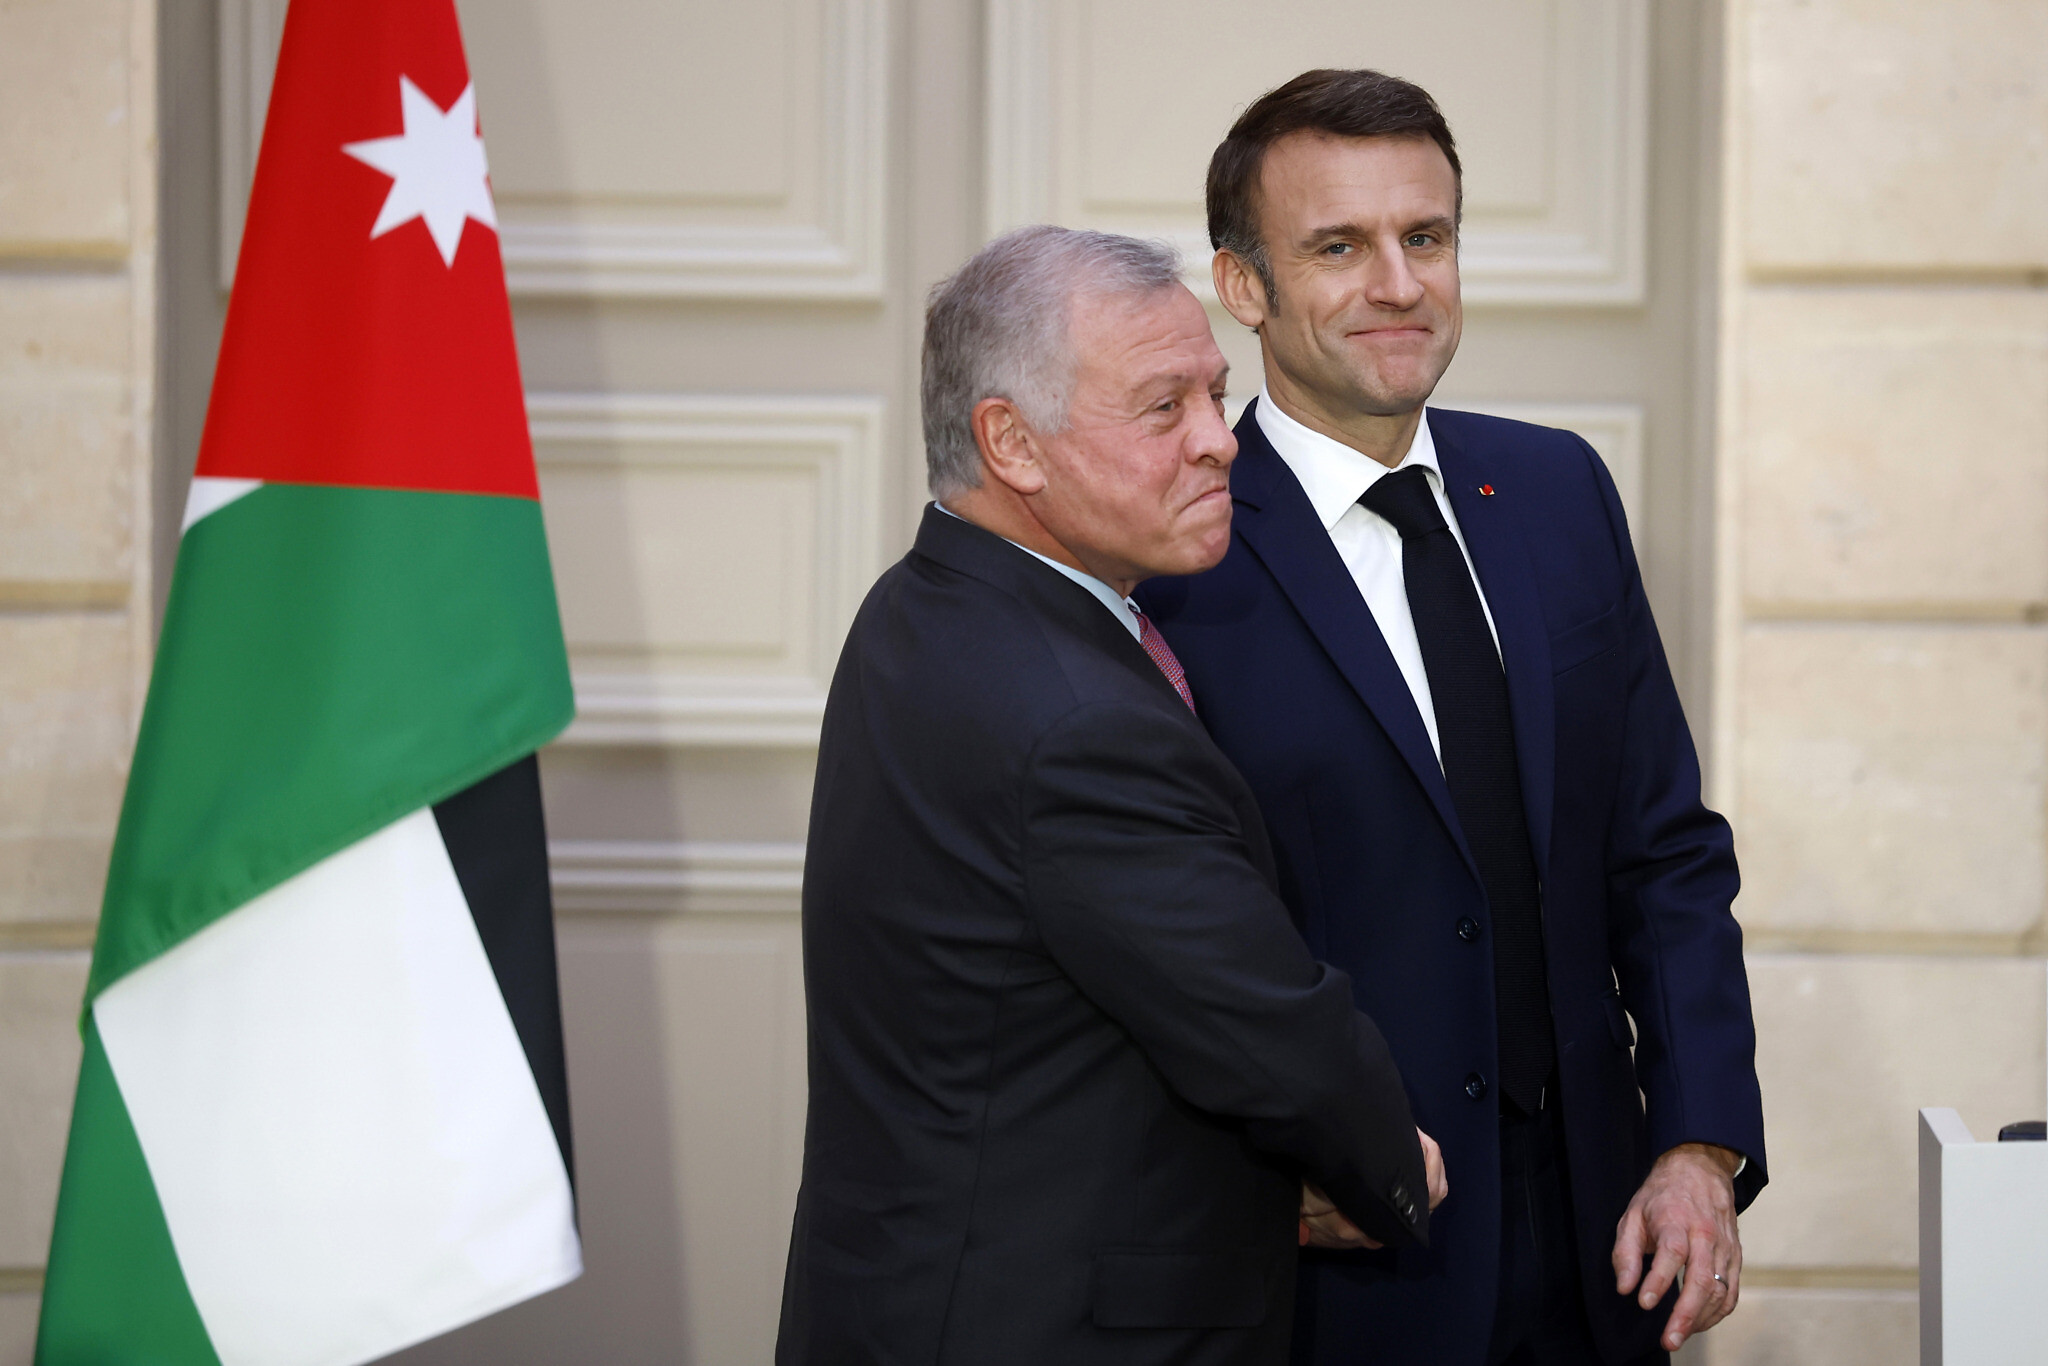 Macron signals France open to recognizing palestine (Credits: The Times of Israel)